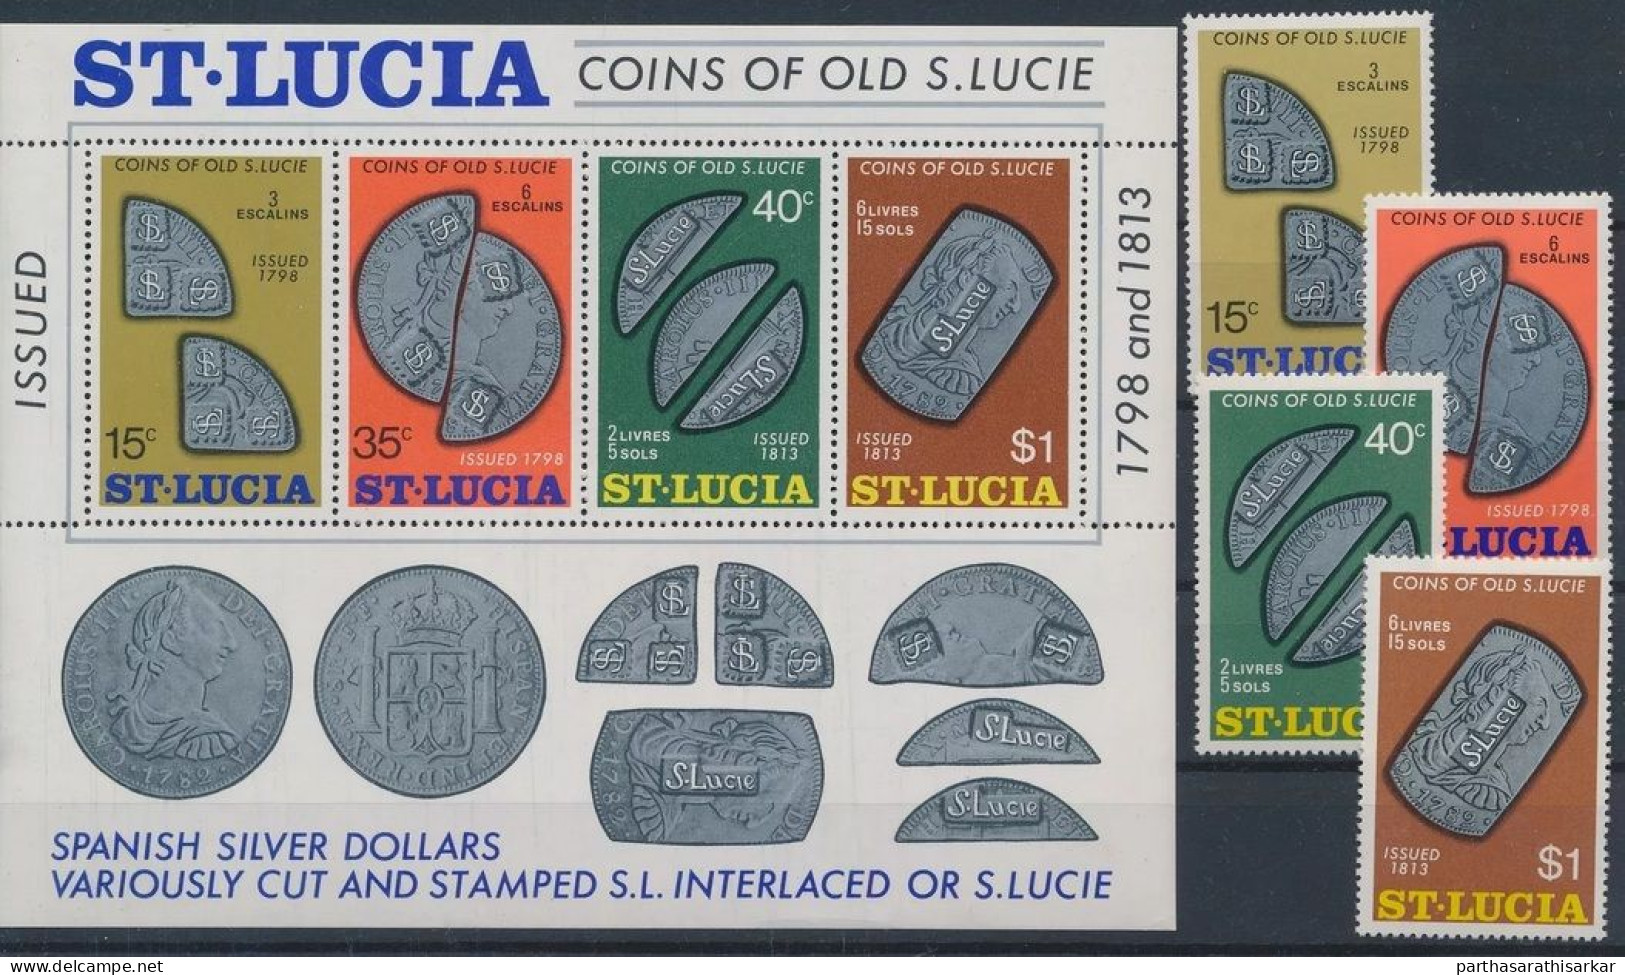 ST. LUCIA 1974 COINS OF OLD ST. LUCIA COMPLETE SET WITH MINIATURE SHEET MS MNH - Monnaies